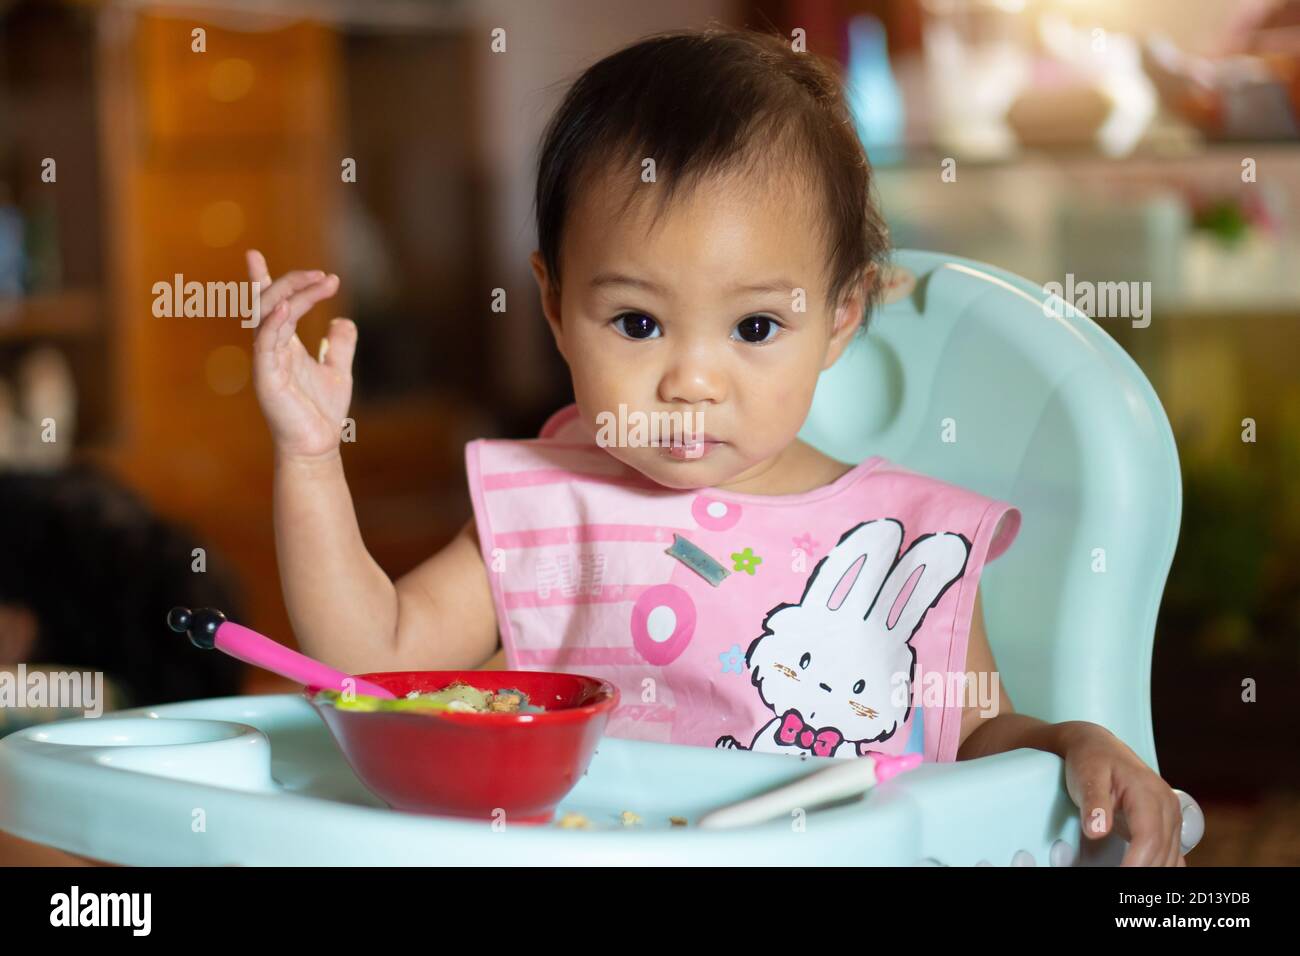 Asian baby girl 11 months year old is eating food on baby table food. Stock Photo